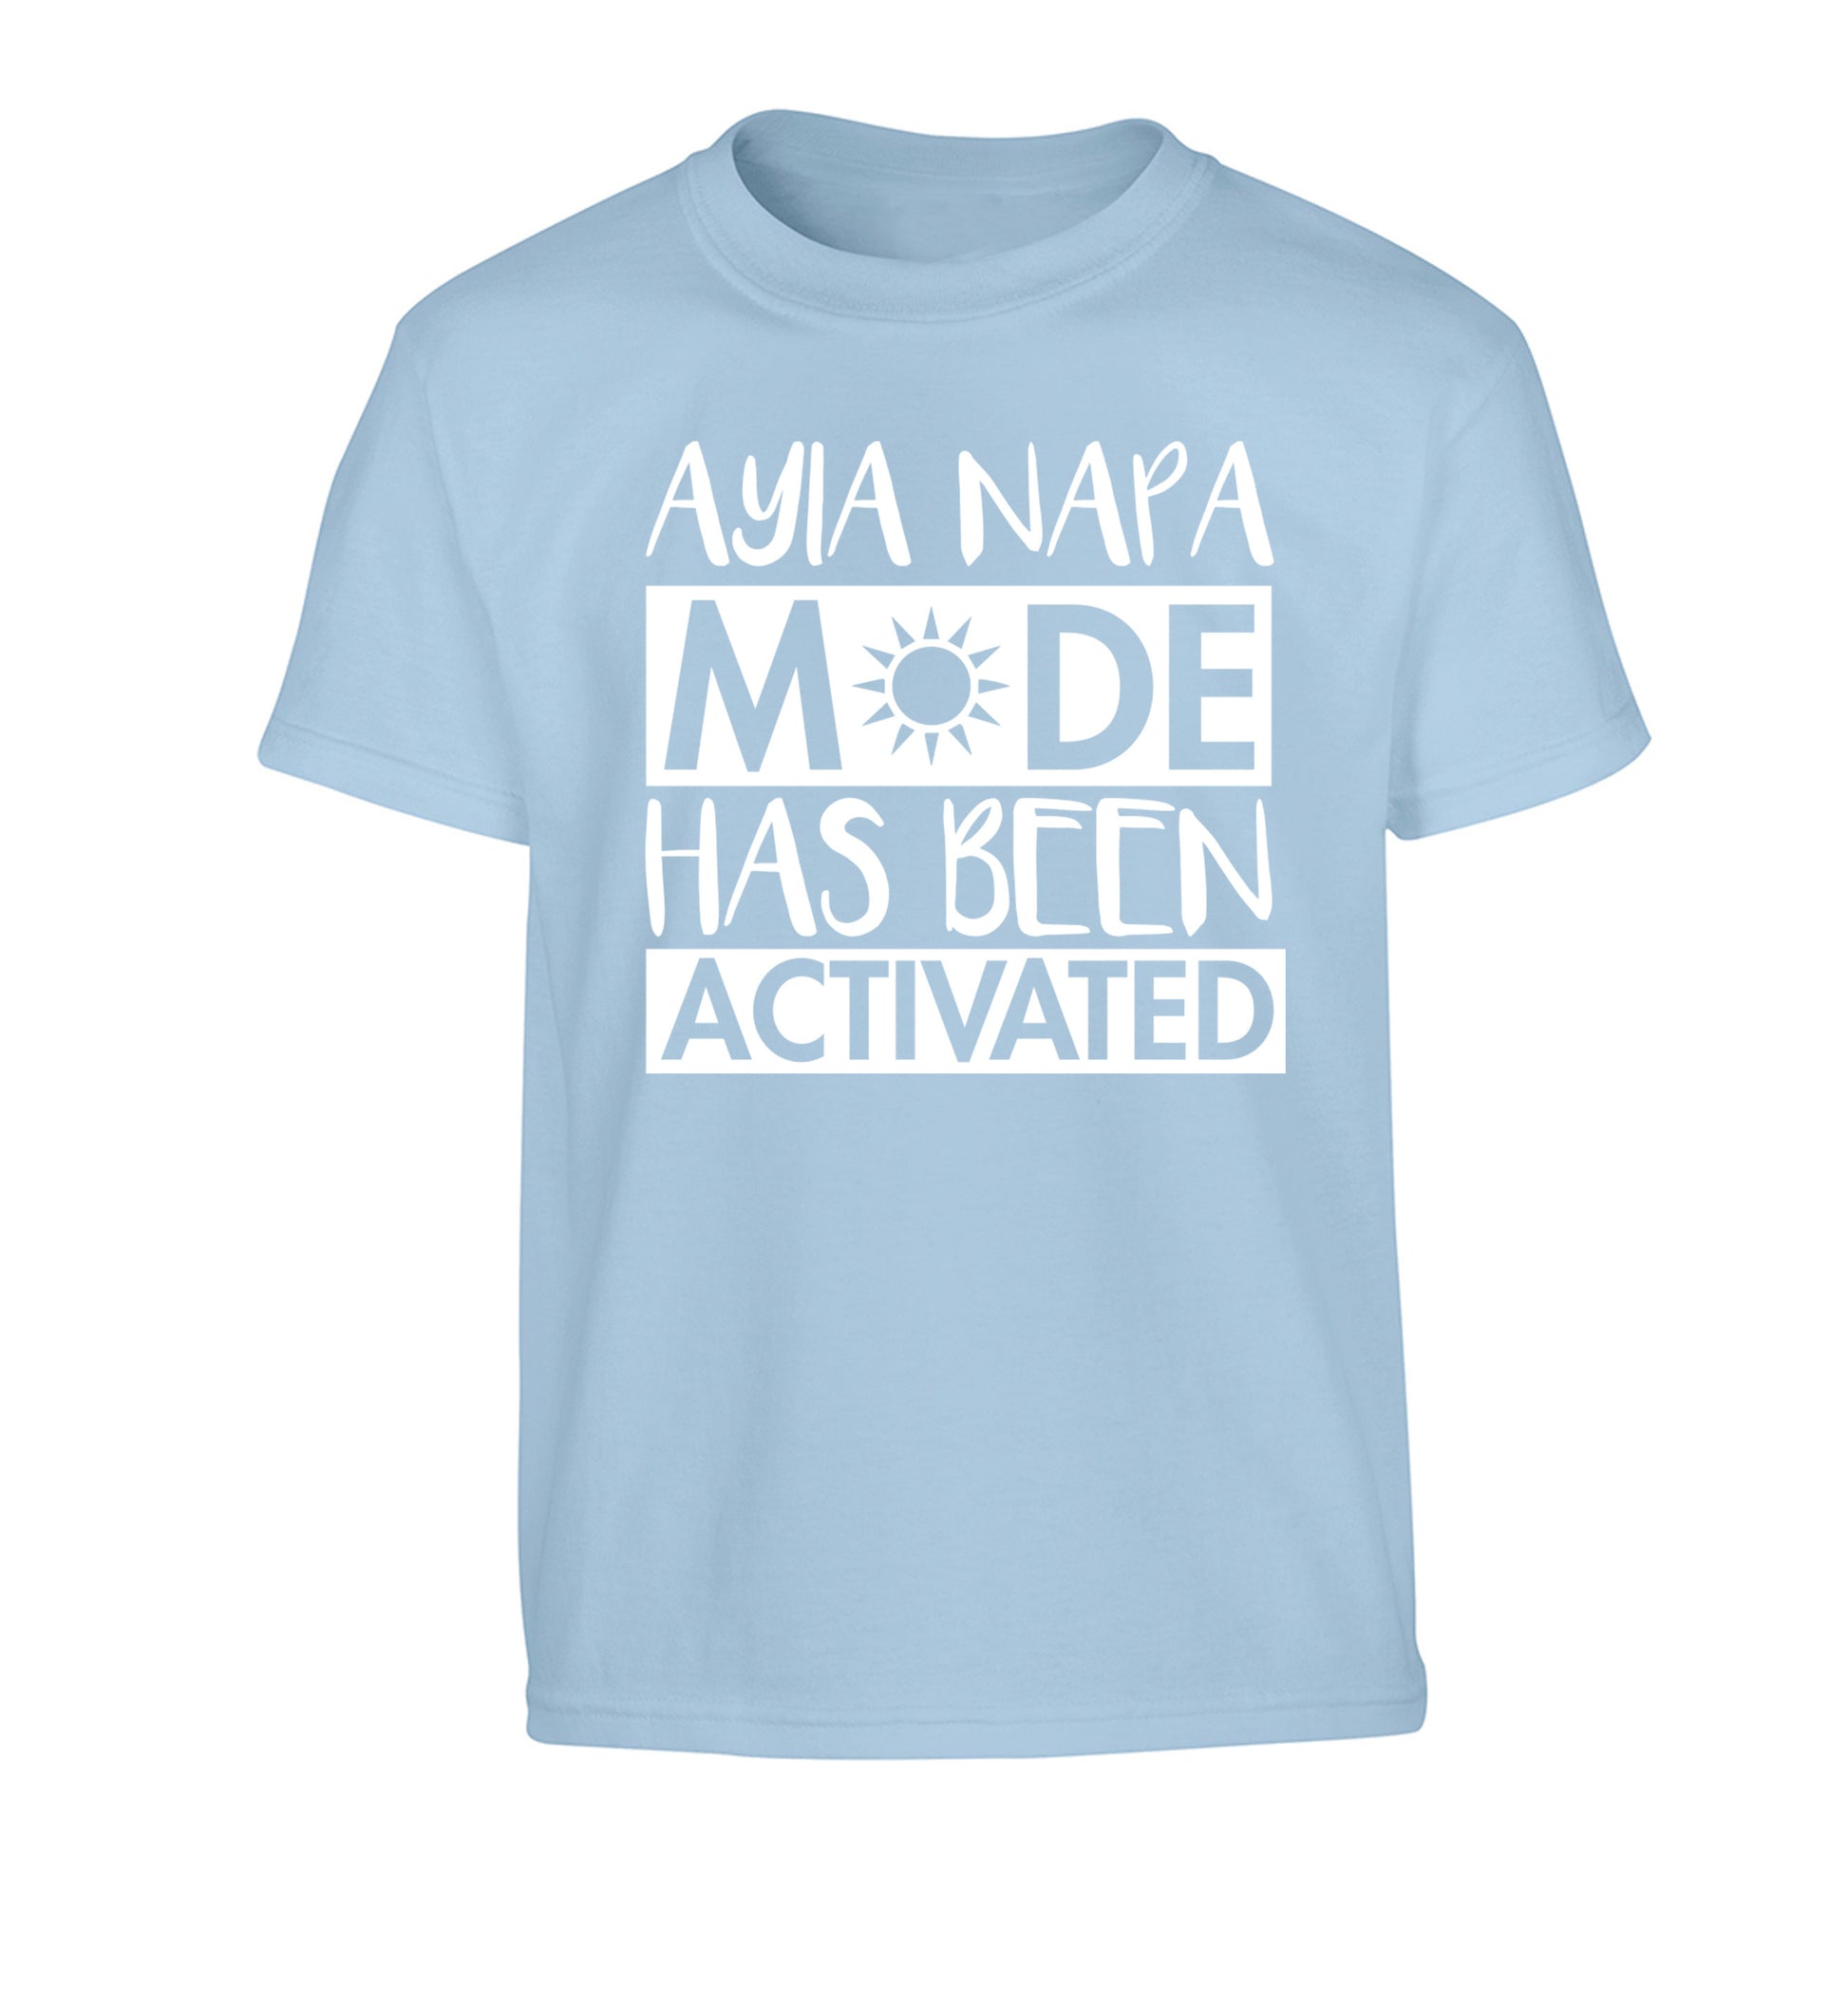 Aiya Napa mode has been activated Children's light blue Tshirt 12-14 Years